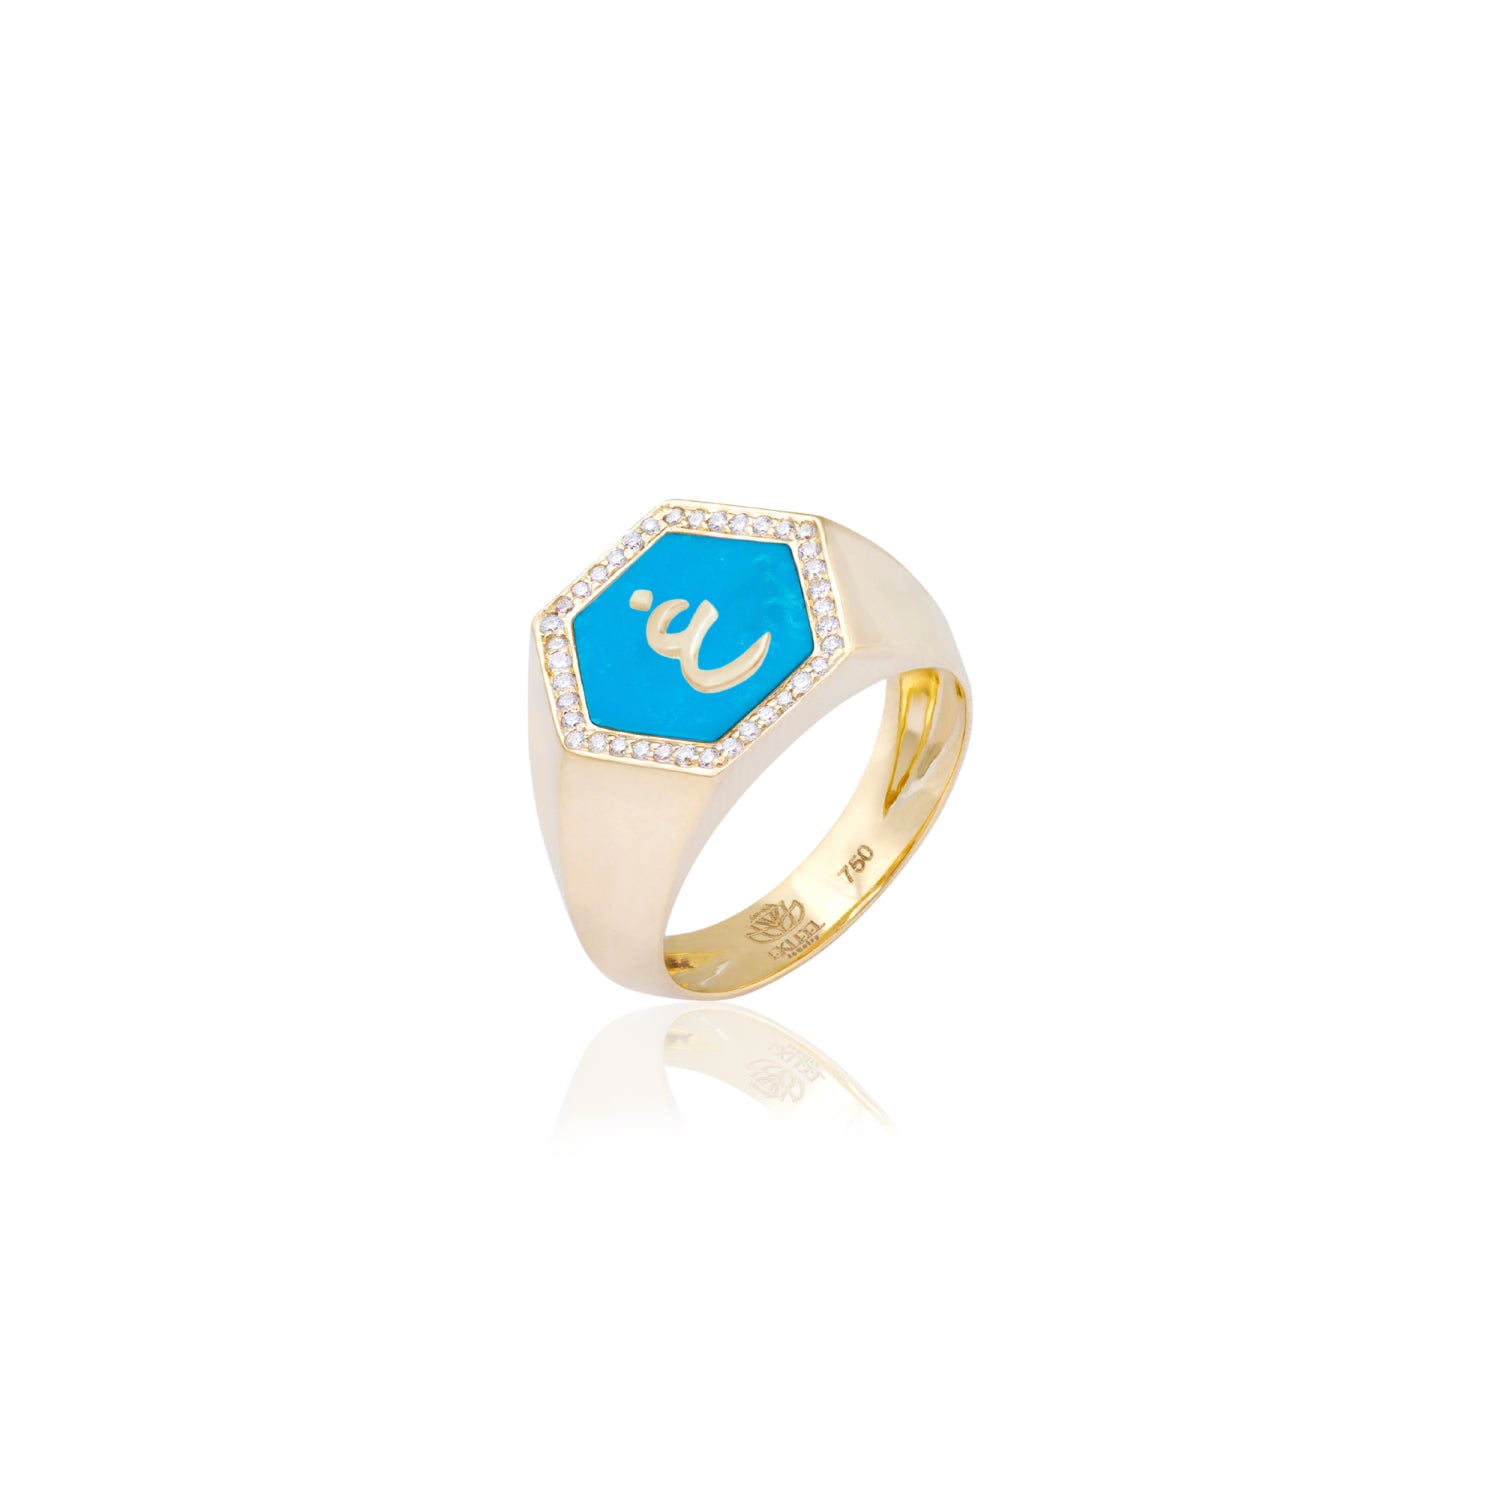 Qamoos 2.0 Letter غ Turquoise and Diamond Signet Ring in Yellow Gold